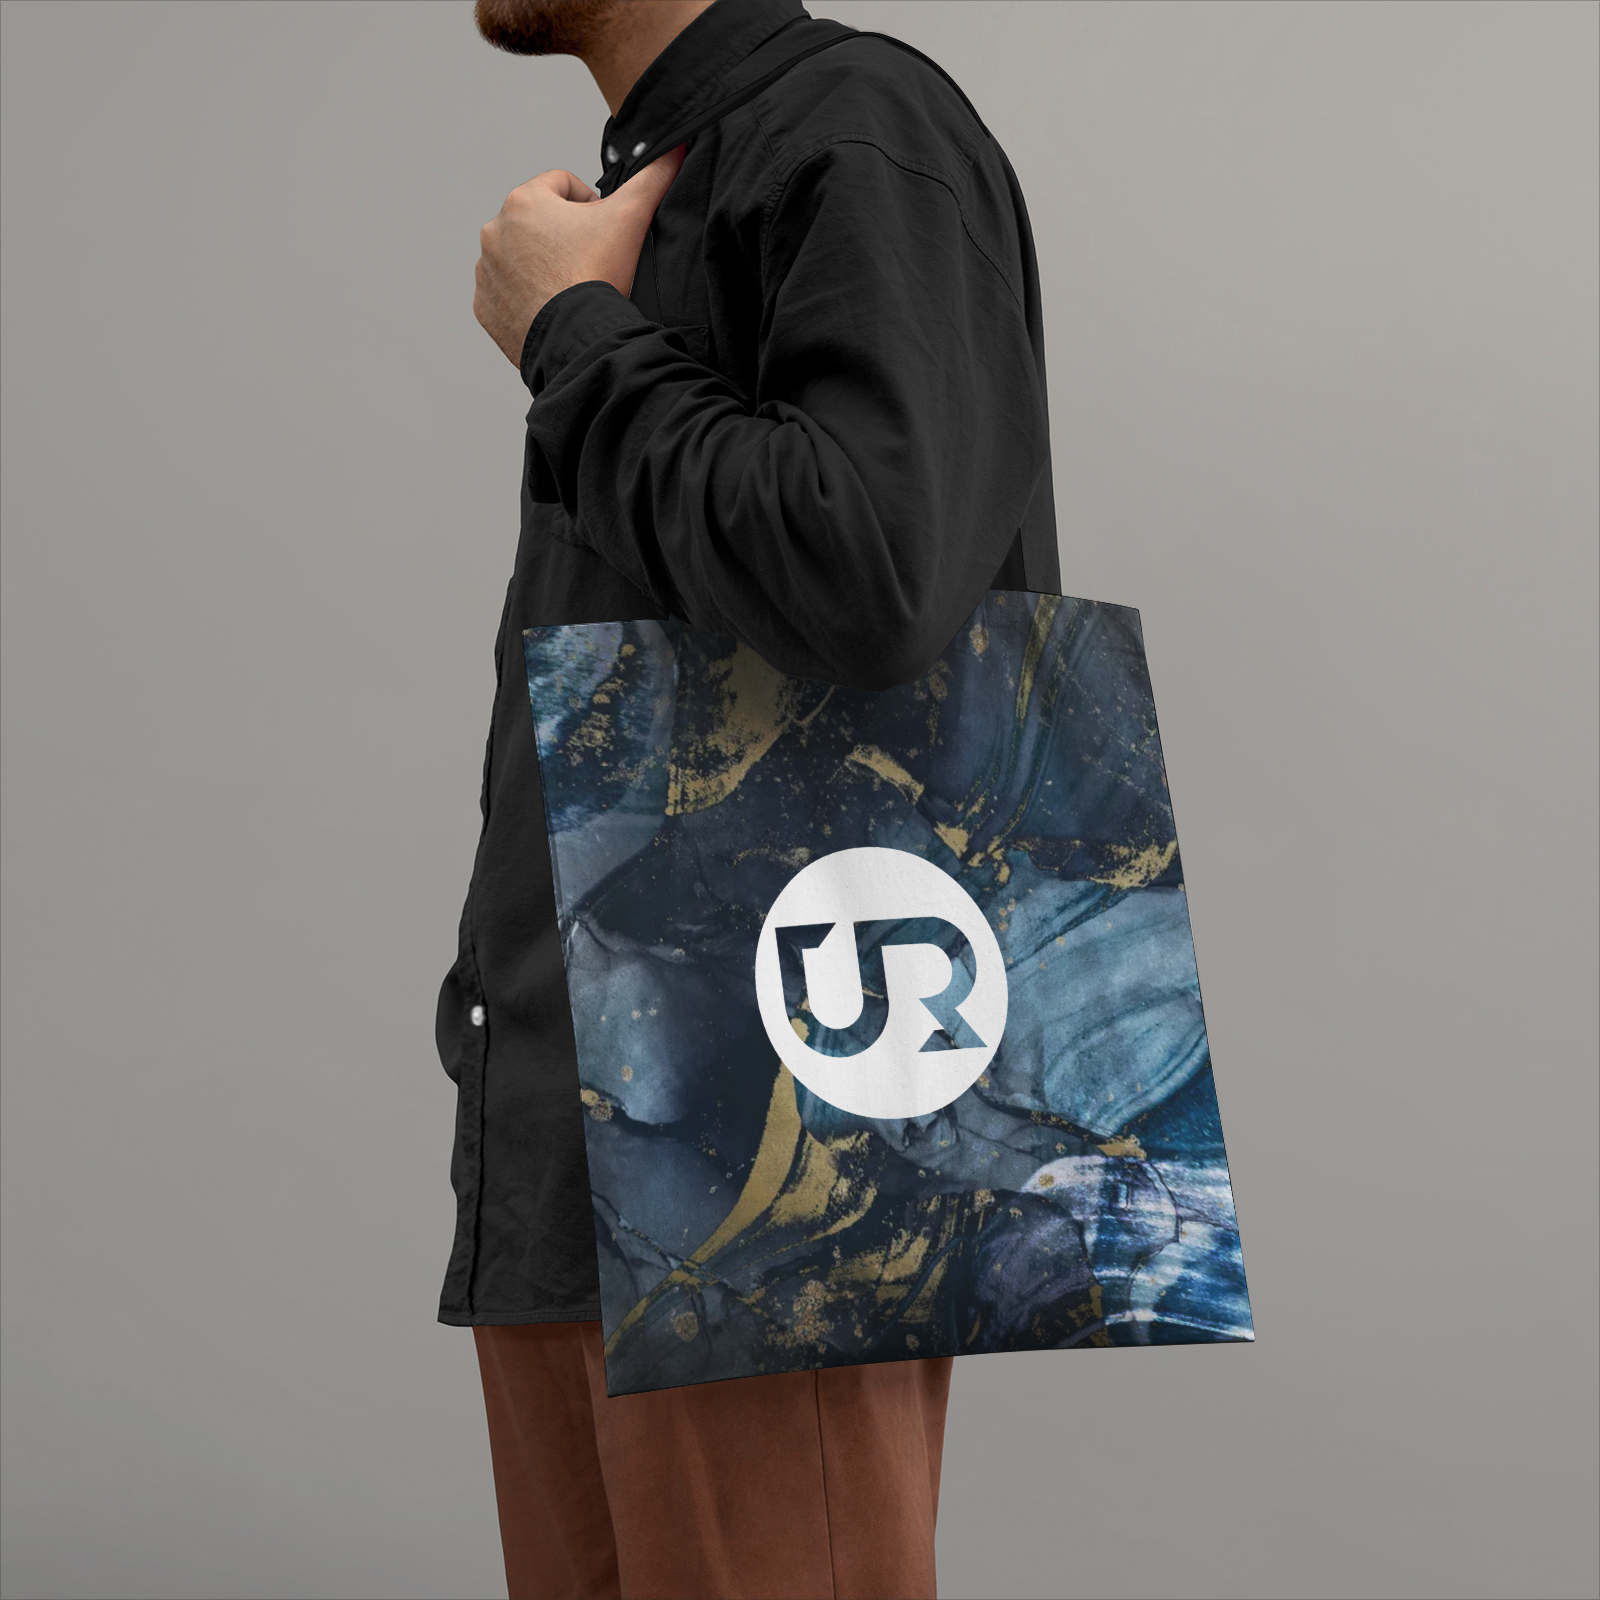 Heavy Duty and Strong Natural Cotton Canvas Tote Bag - UGO ROMANO URTB077